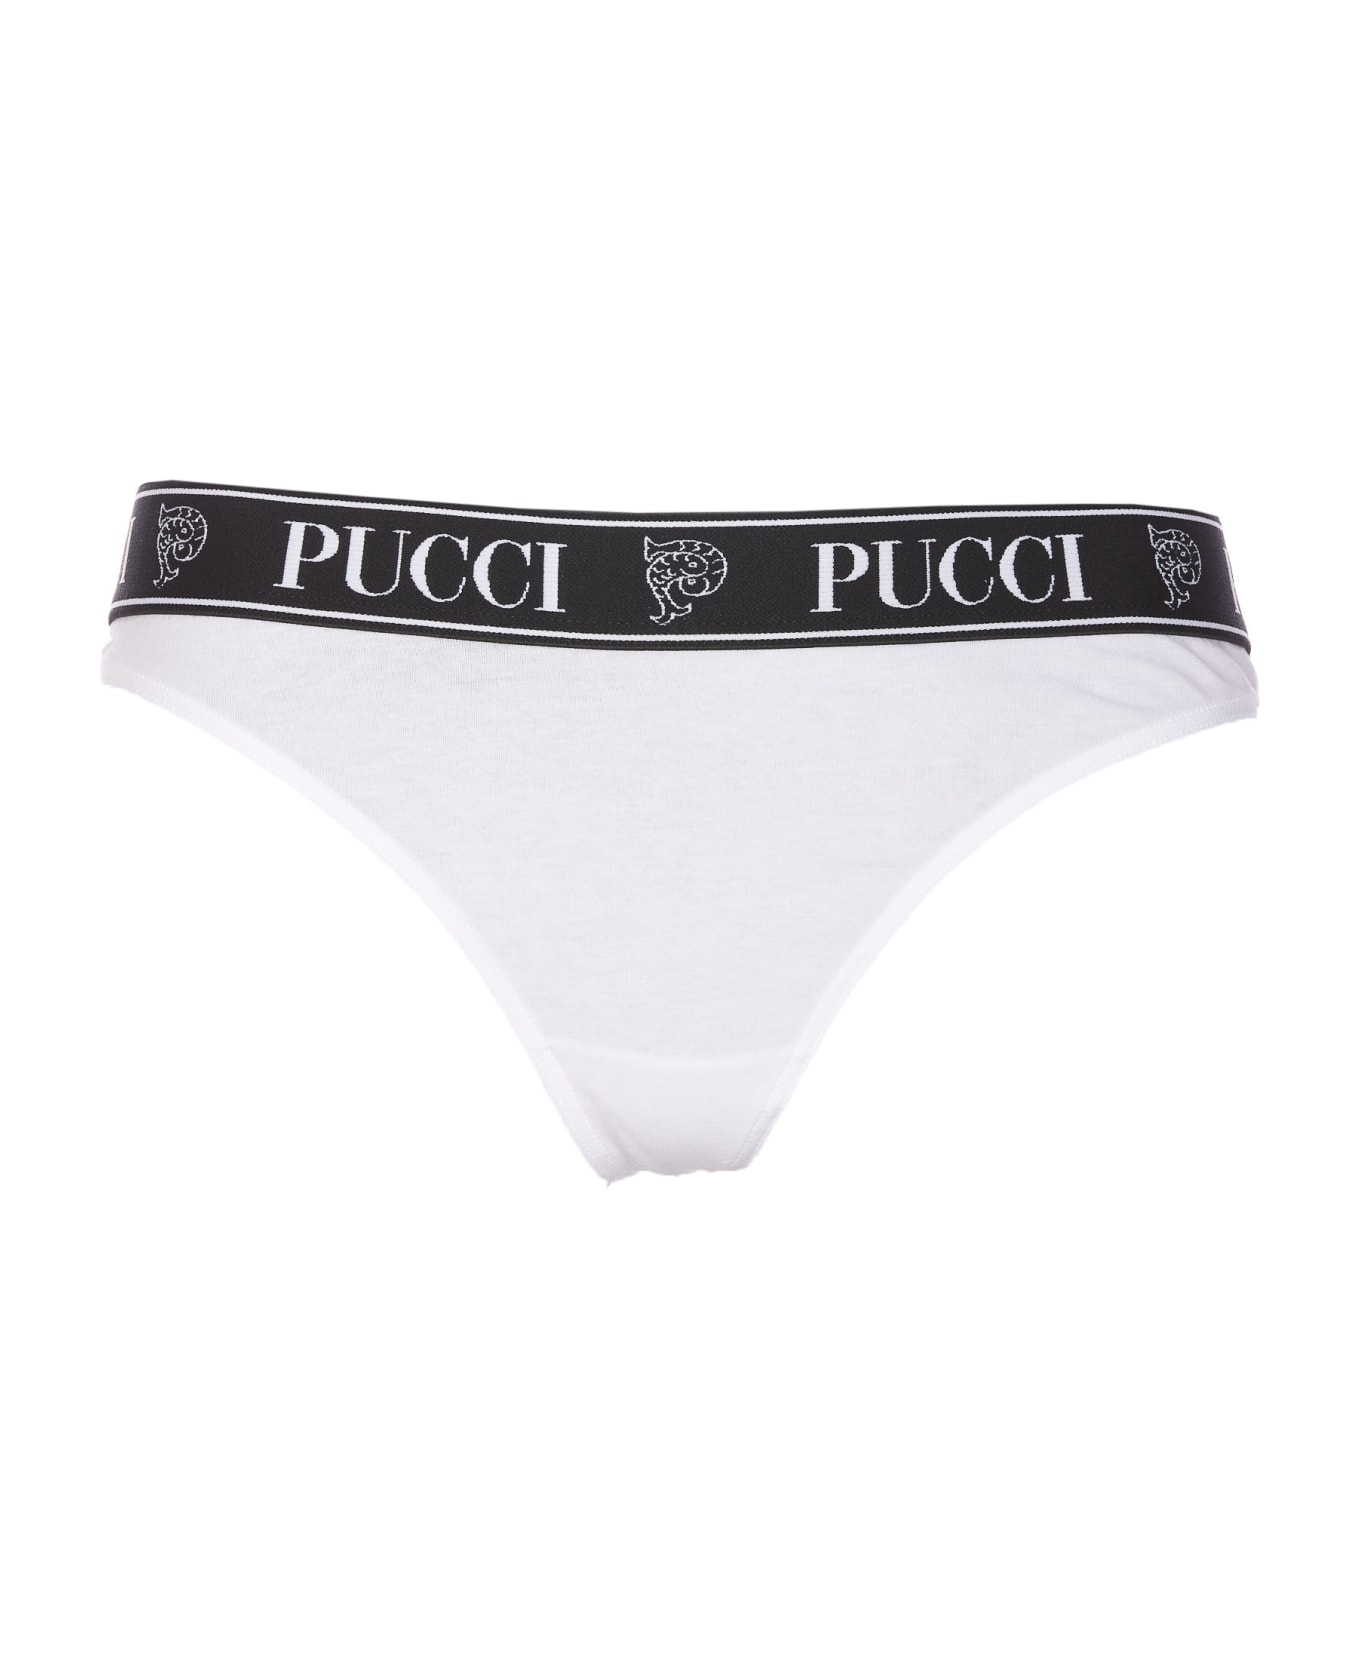 Pucci 3pack Thong - Blue